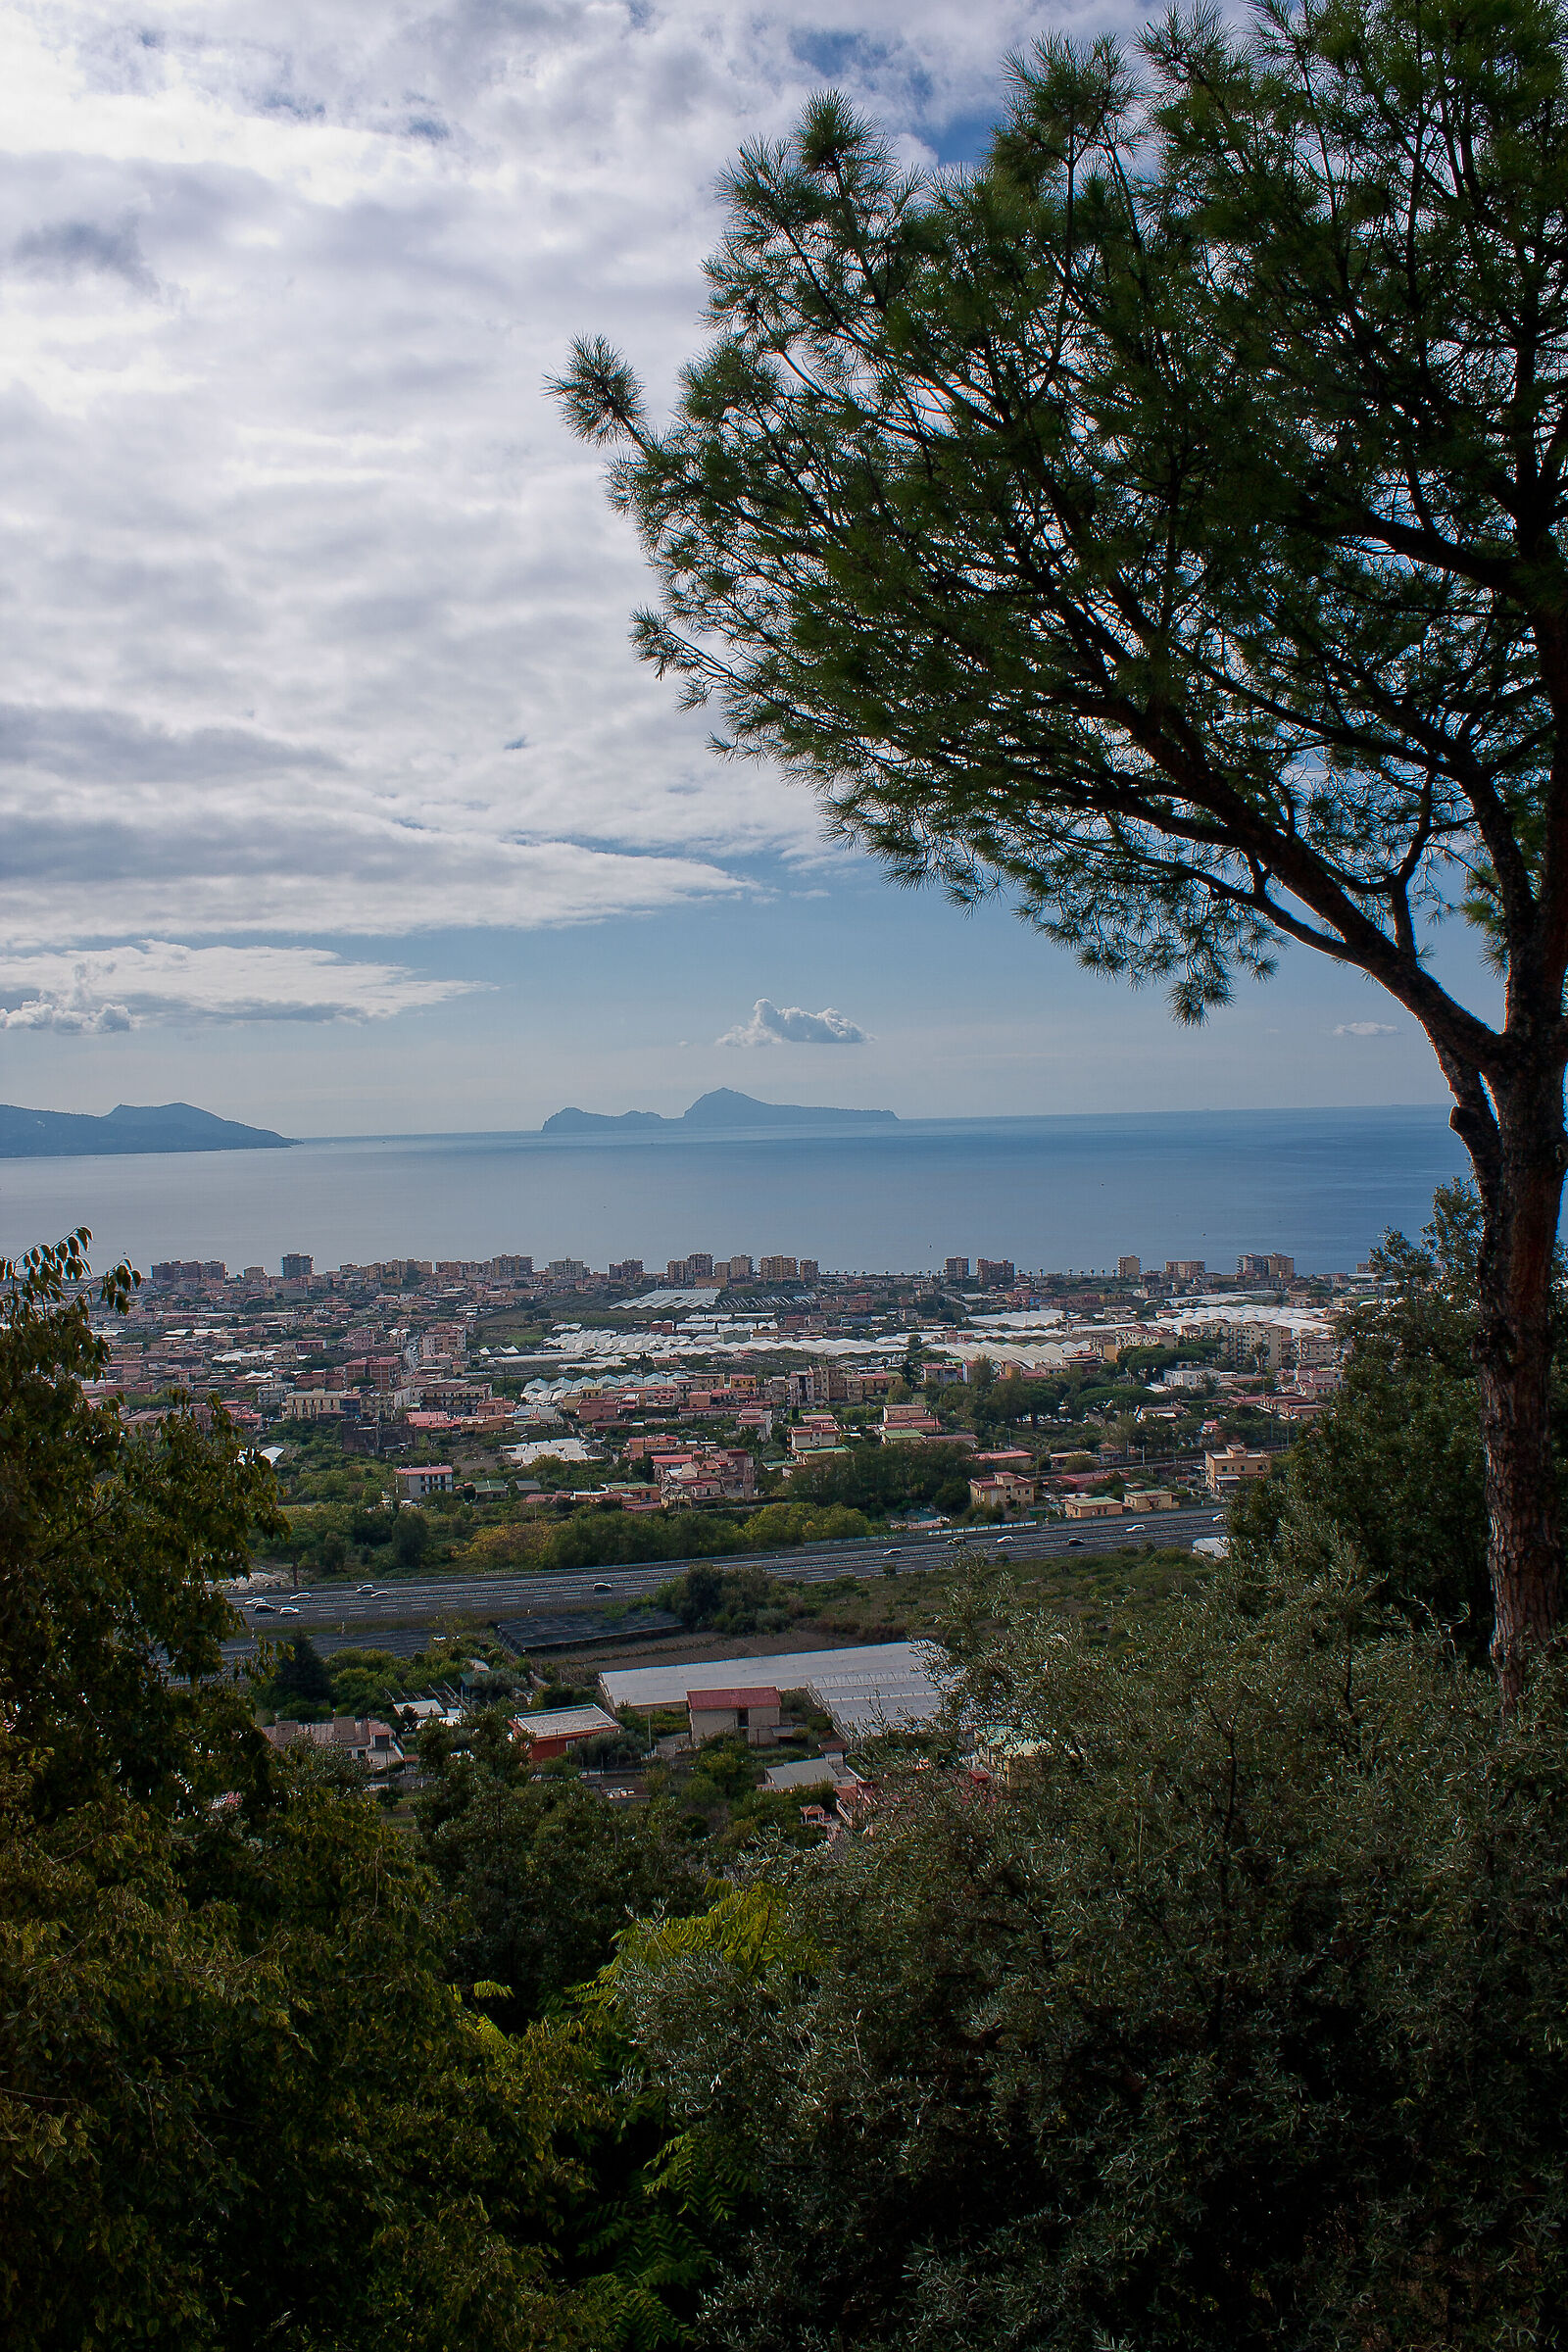 capri from the hill of sant alfonso...